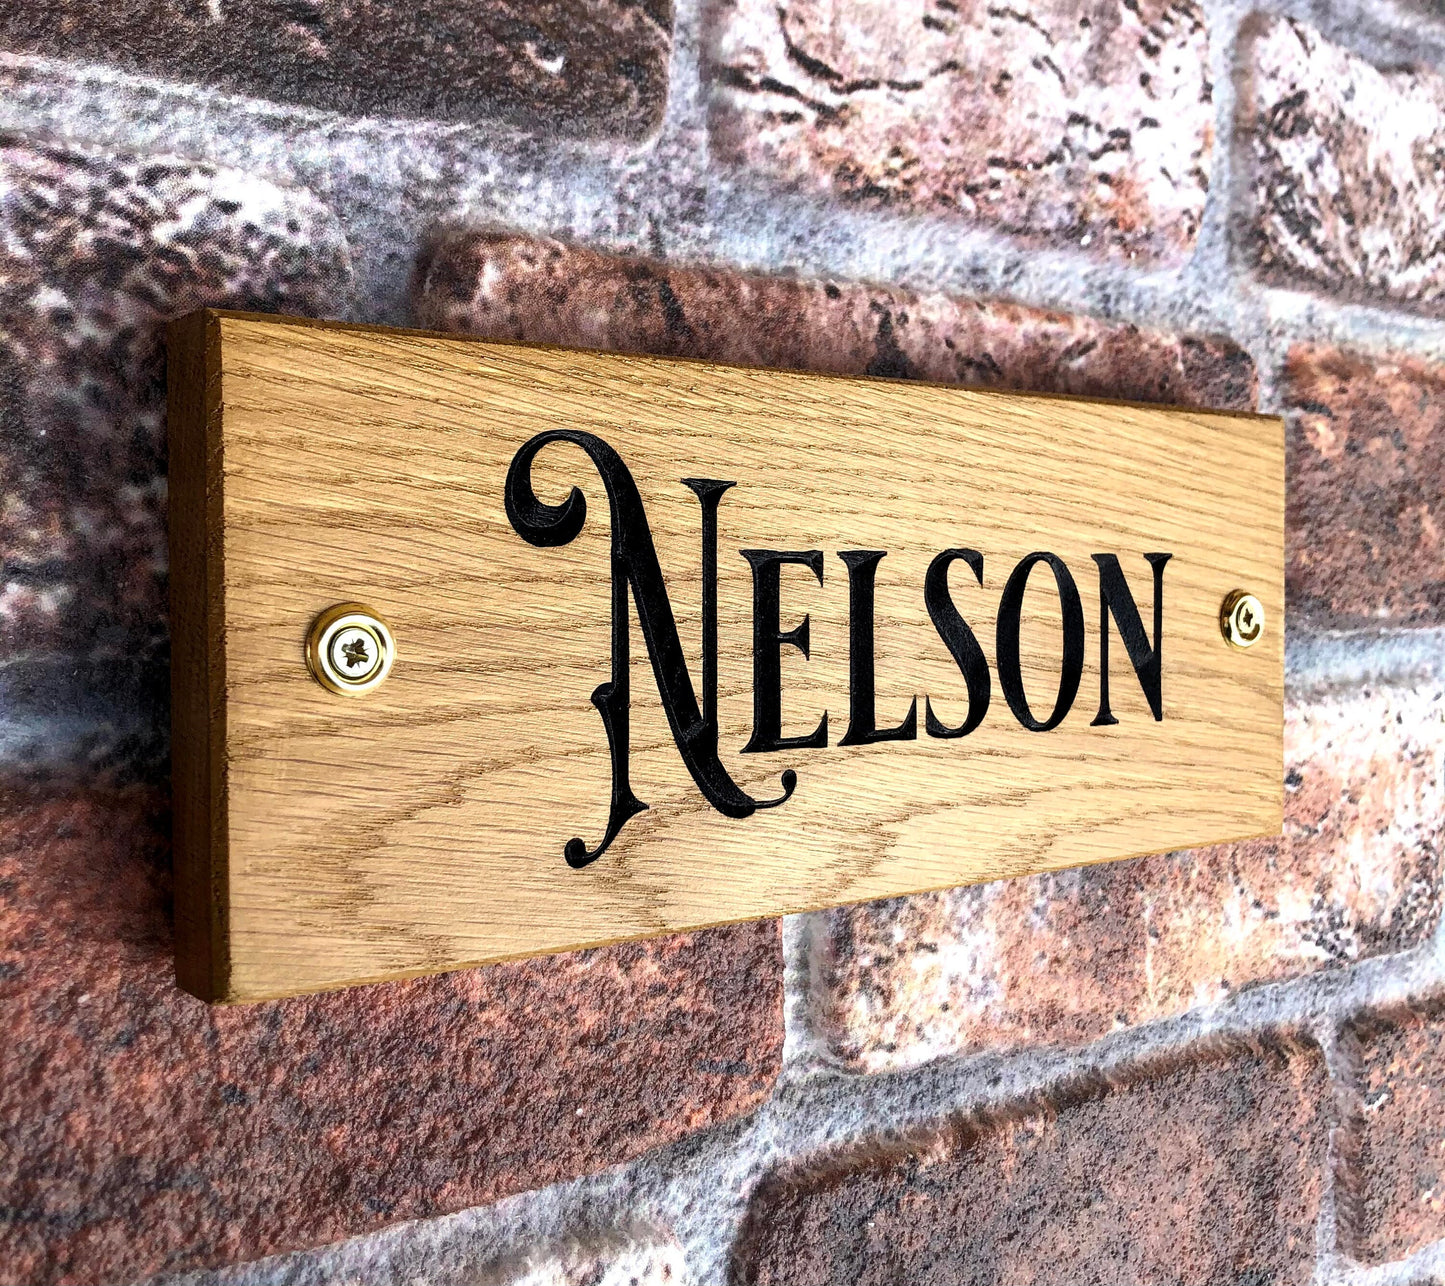 Personalised Horse Stable/Stall Name Sign - Royal Signage - OAK